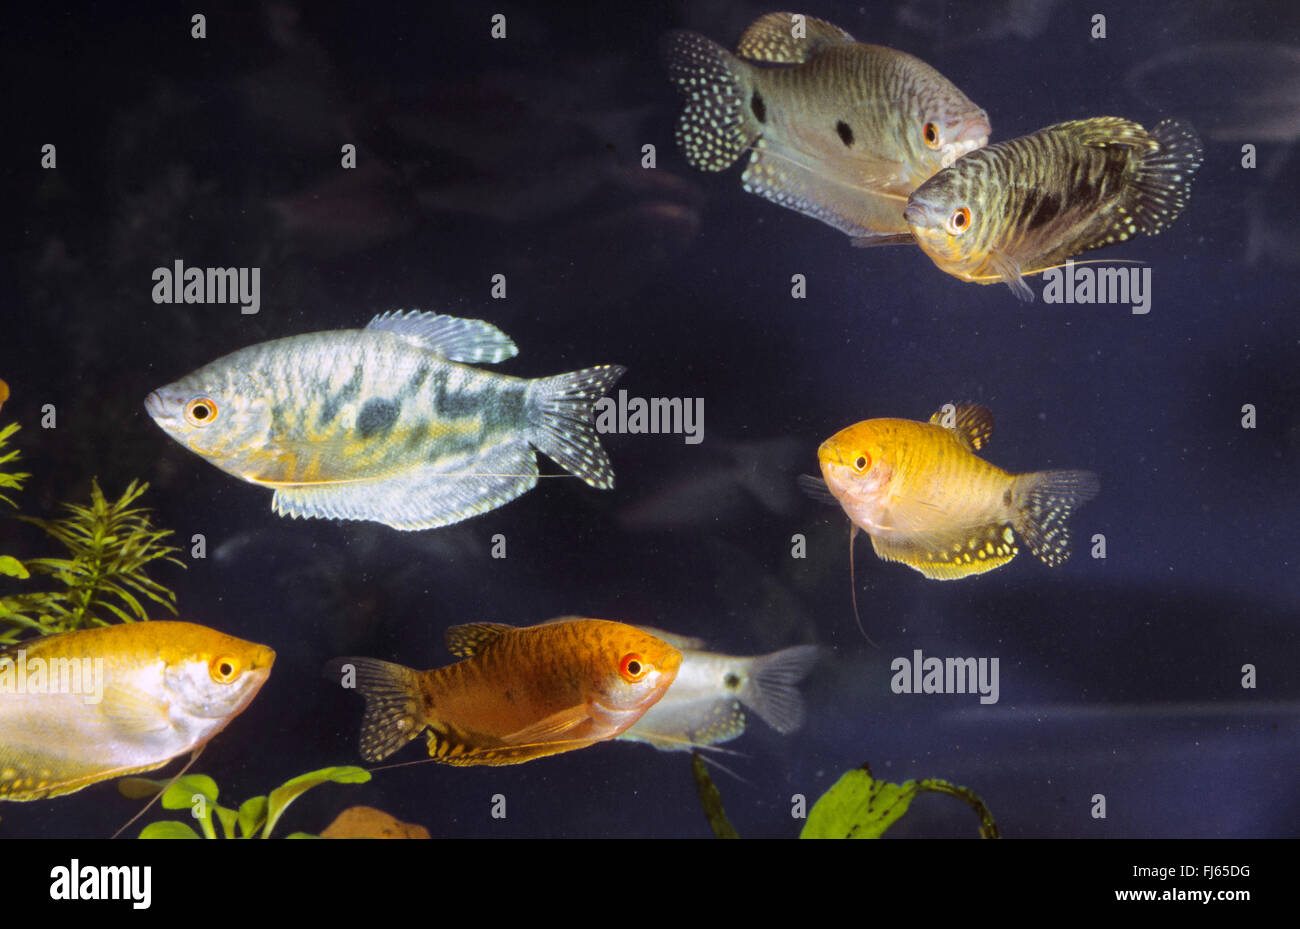 Cosby gourami and Gold gourami (Trichogaster trichopterus cosby und gold), school of fishes Stock Photo